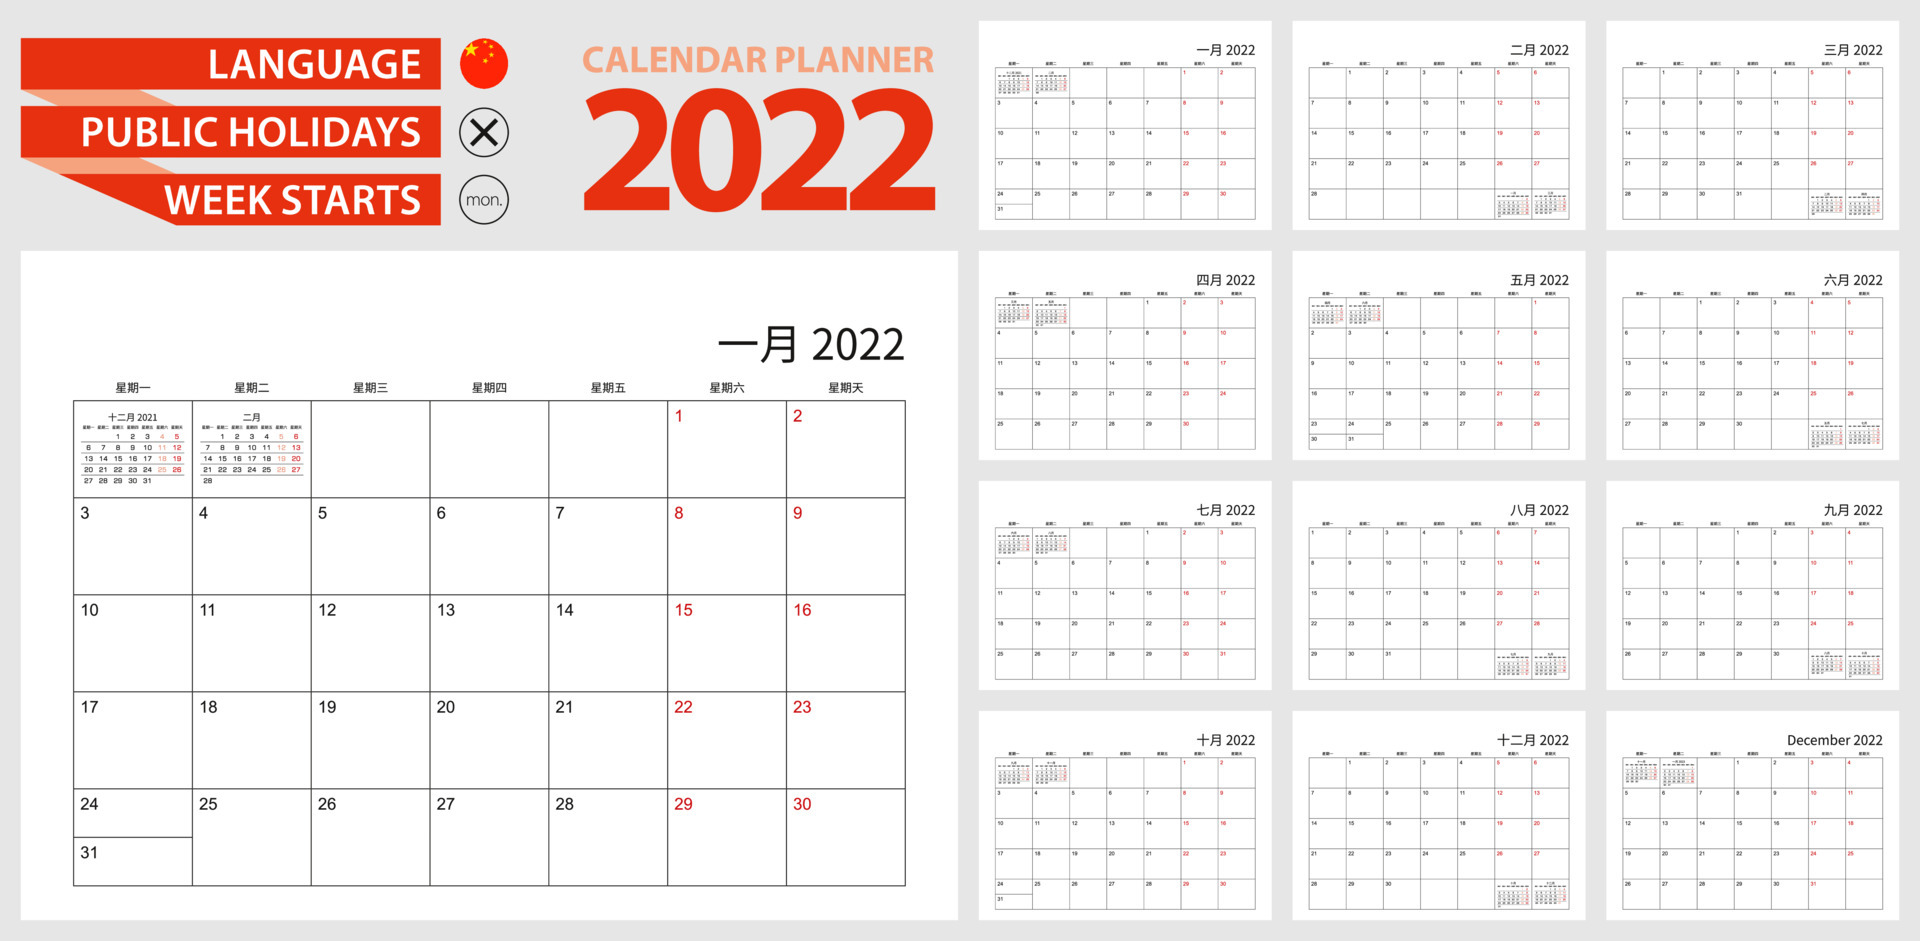 Chinese Calendar Planner For 22 Chinese Language Week Starts From Monday Vector Calendar Template For China Singapore Taiwan And Other Vector Art At Vecteezy